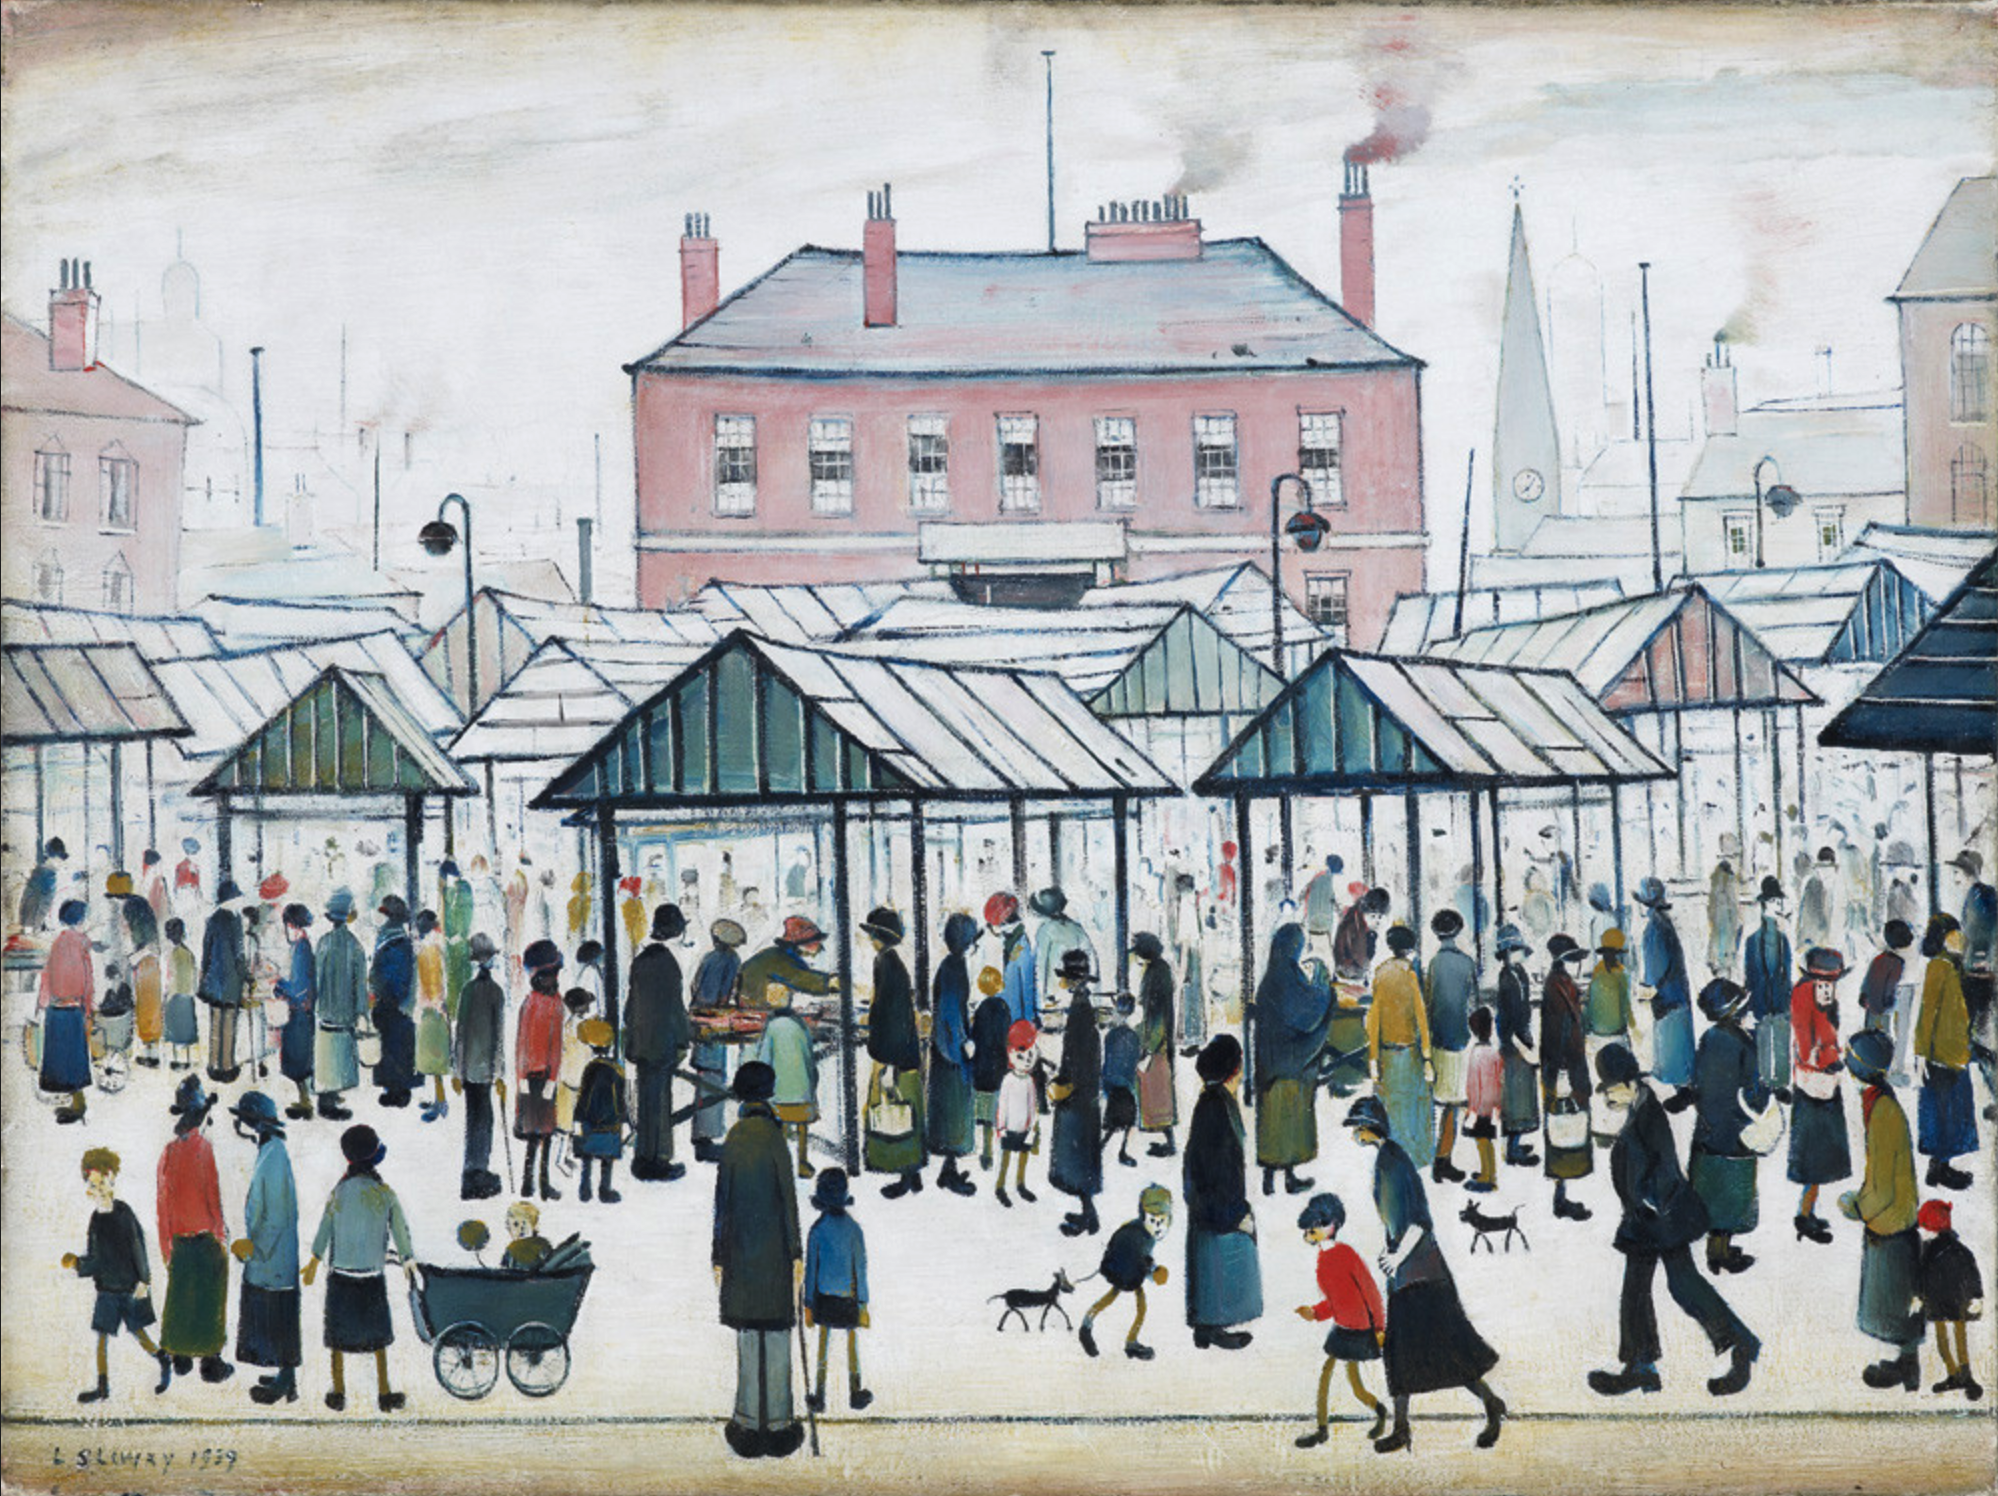 Market Scene, Northern Town (1939) by Laurence Stephen Lowry (1887 - 1976), English artist.